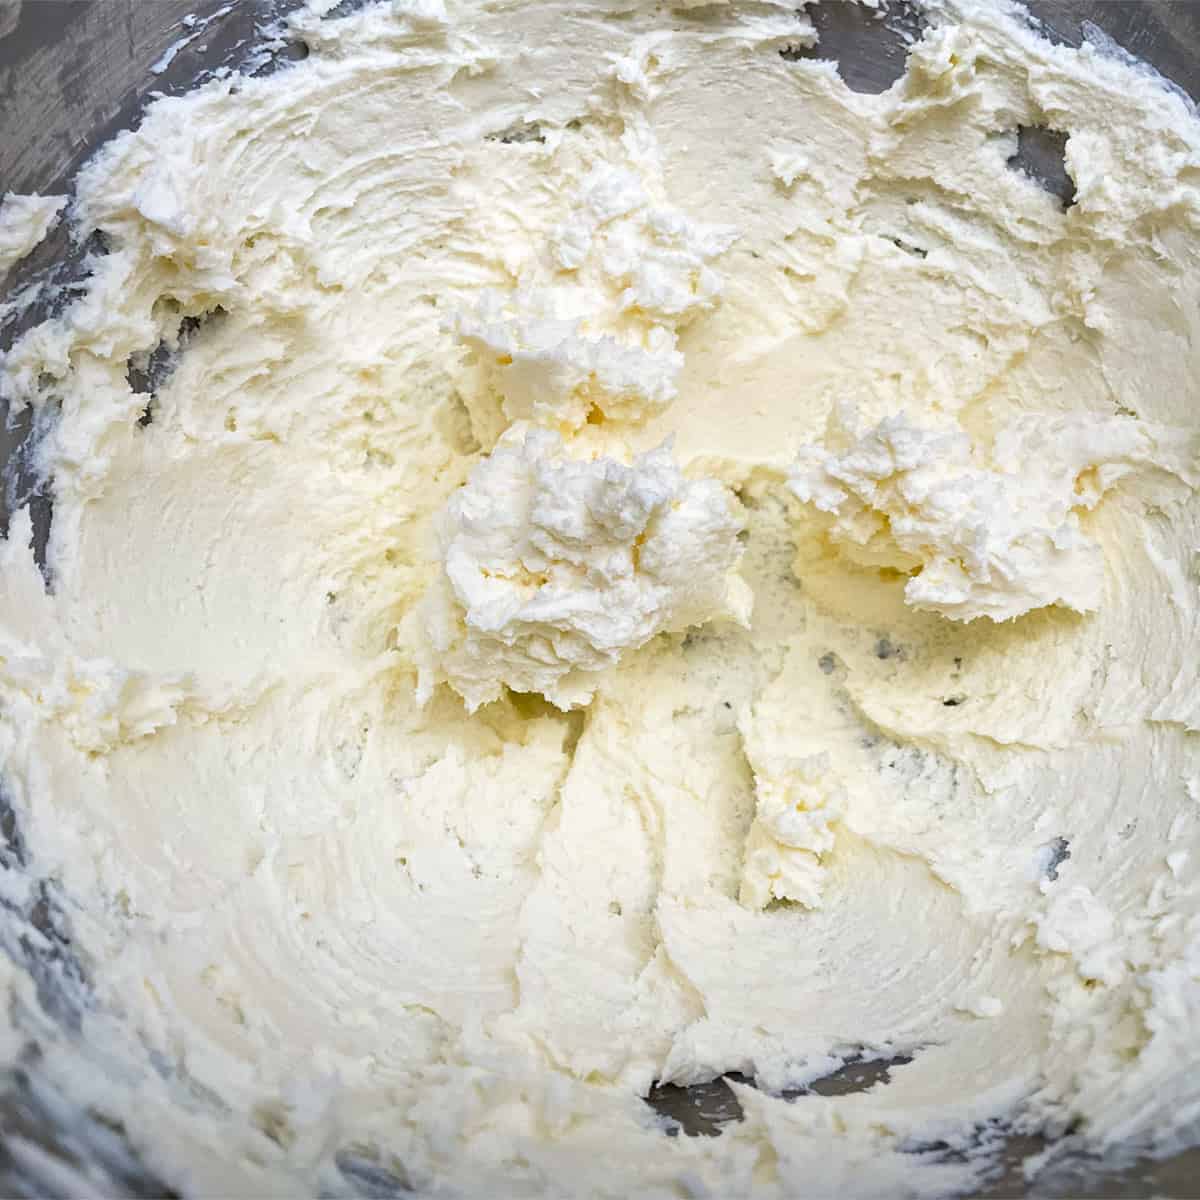 How cream cheese and butter looks kinda lumpy after mixing for 2 to 3 minutes.